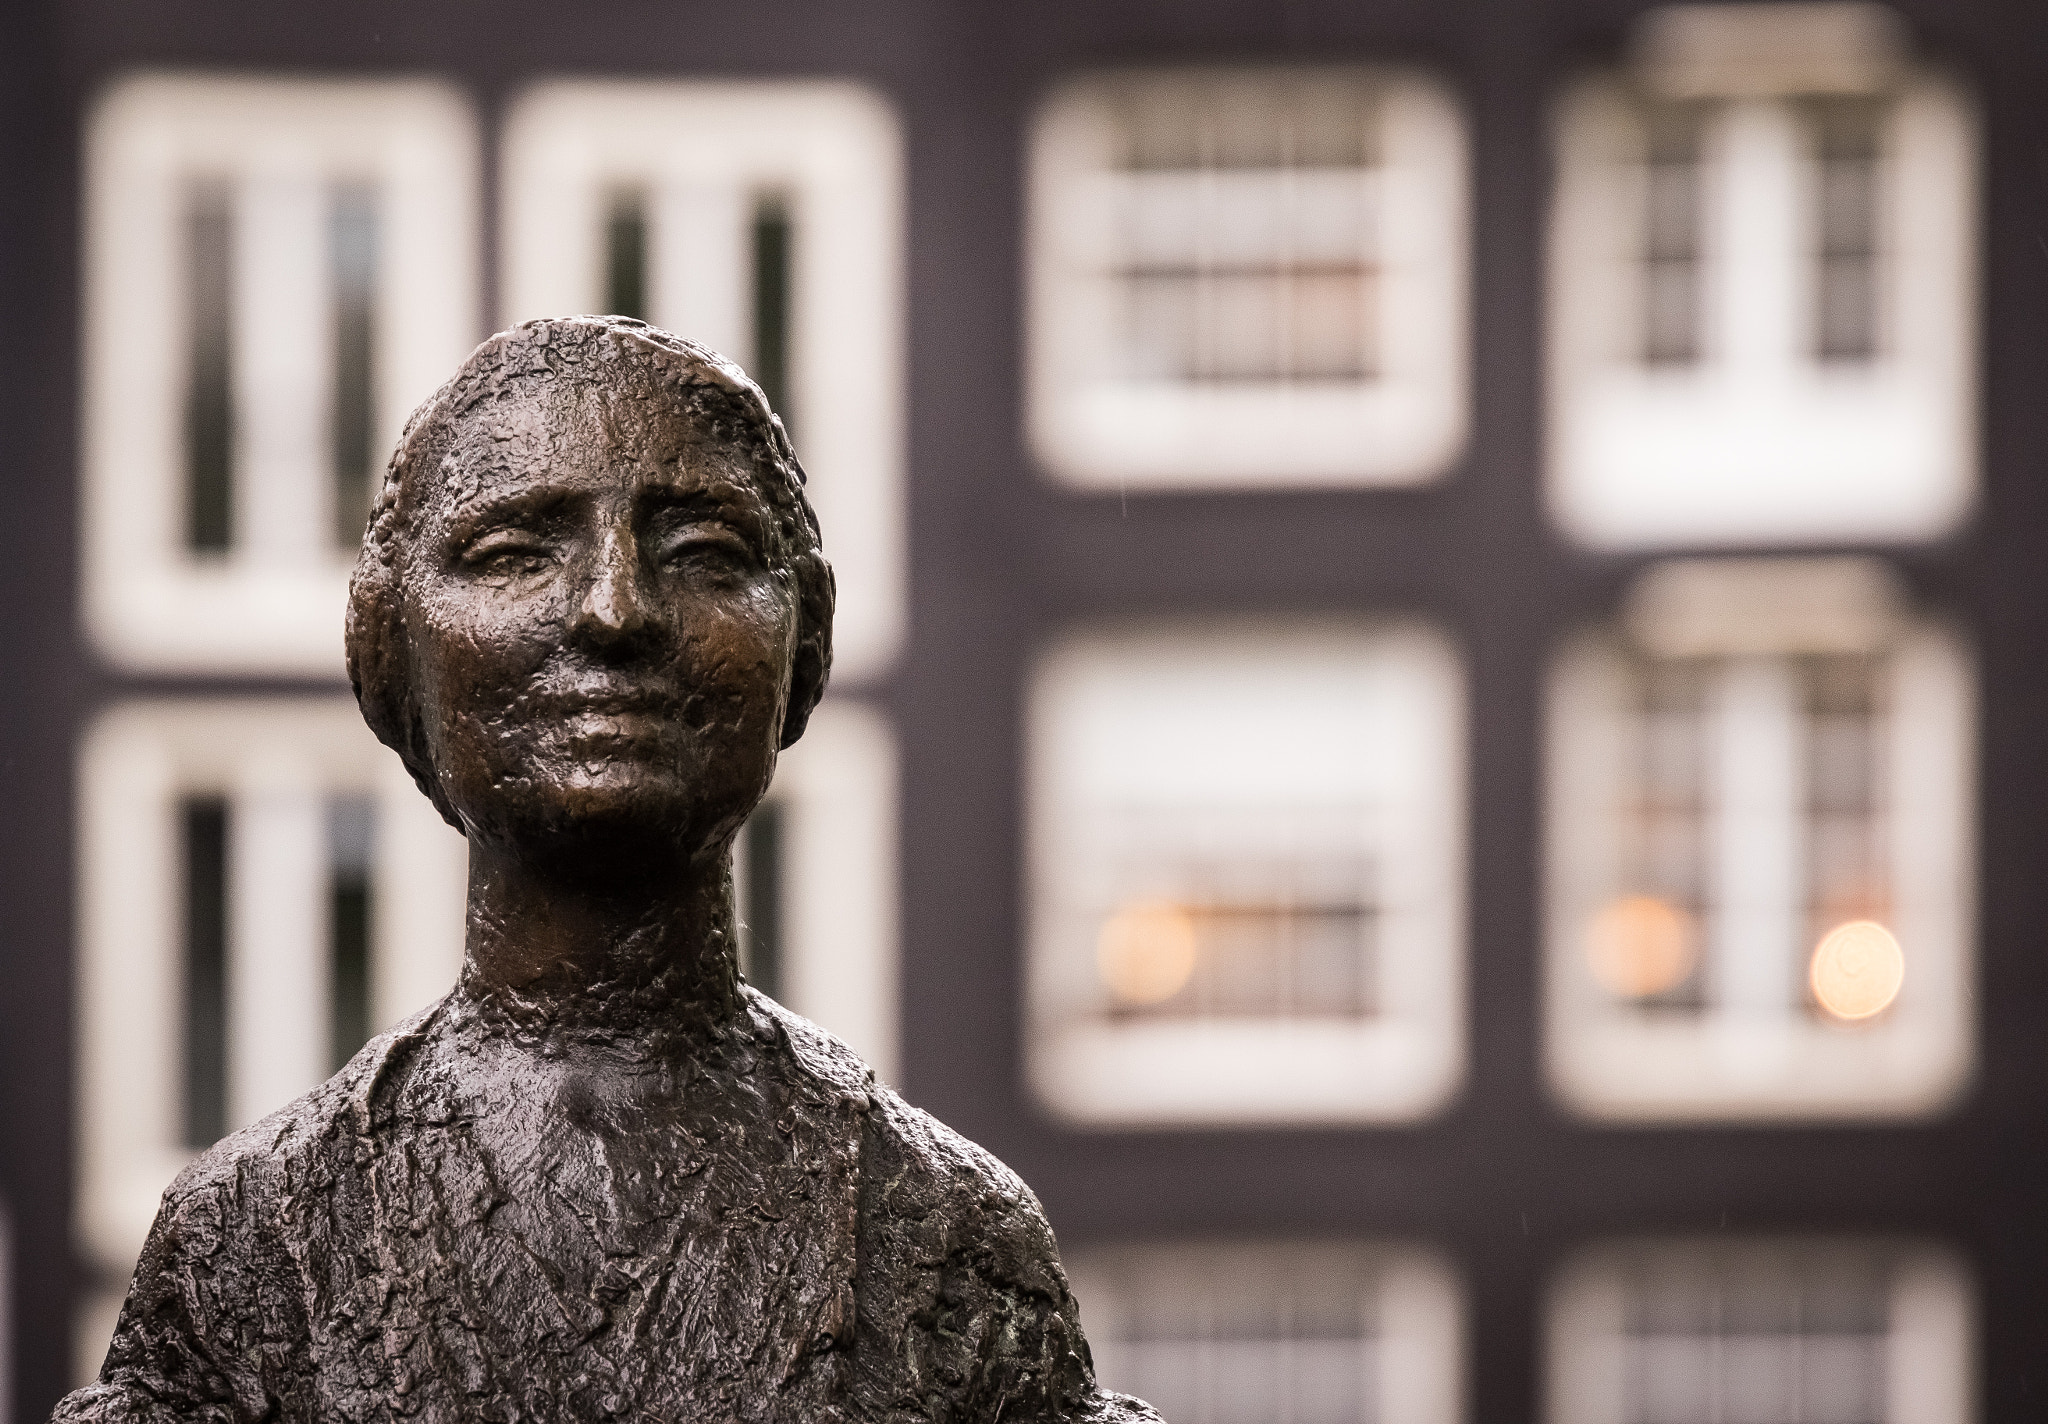 Canon EOS 7D Mark II + Sigma 24-105mm f/4 DG OS HSM | A sample photo. Old lady of amsterdam photography